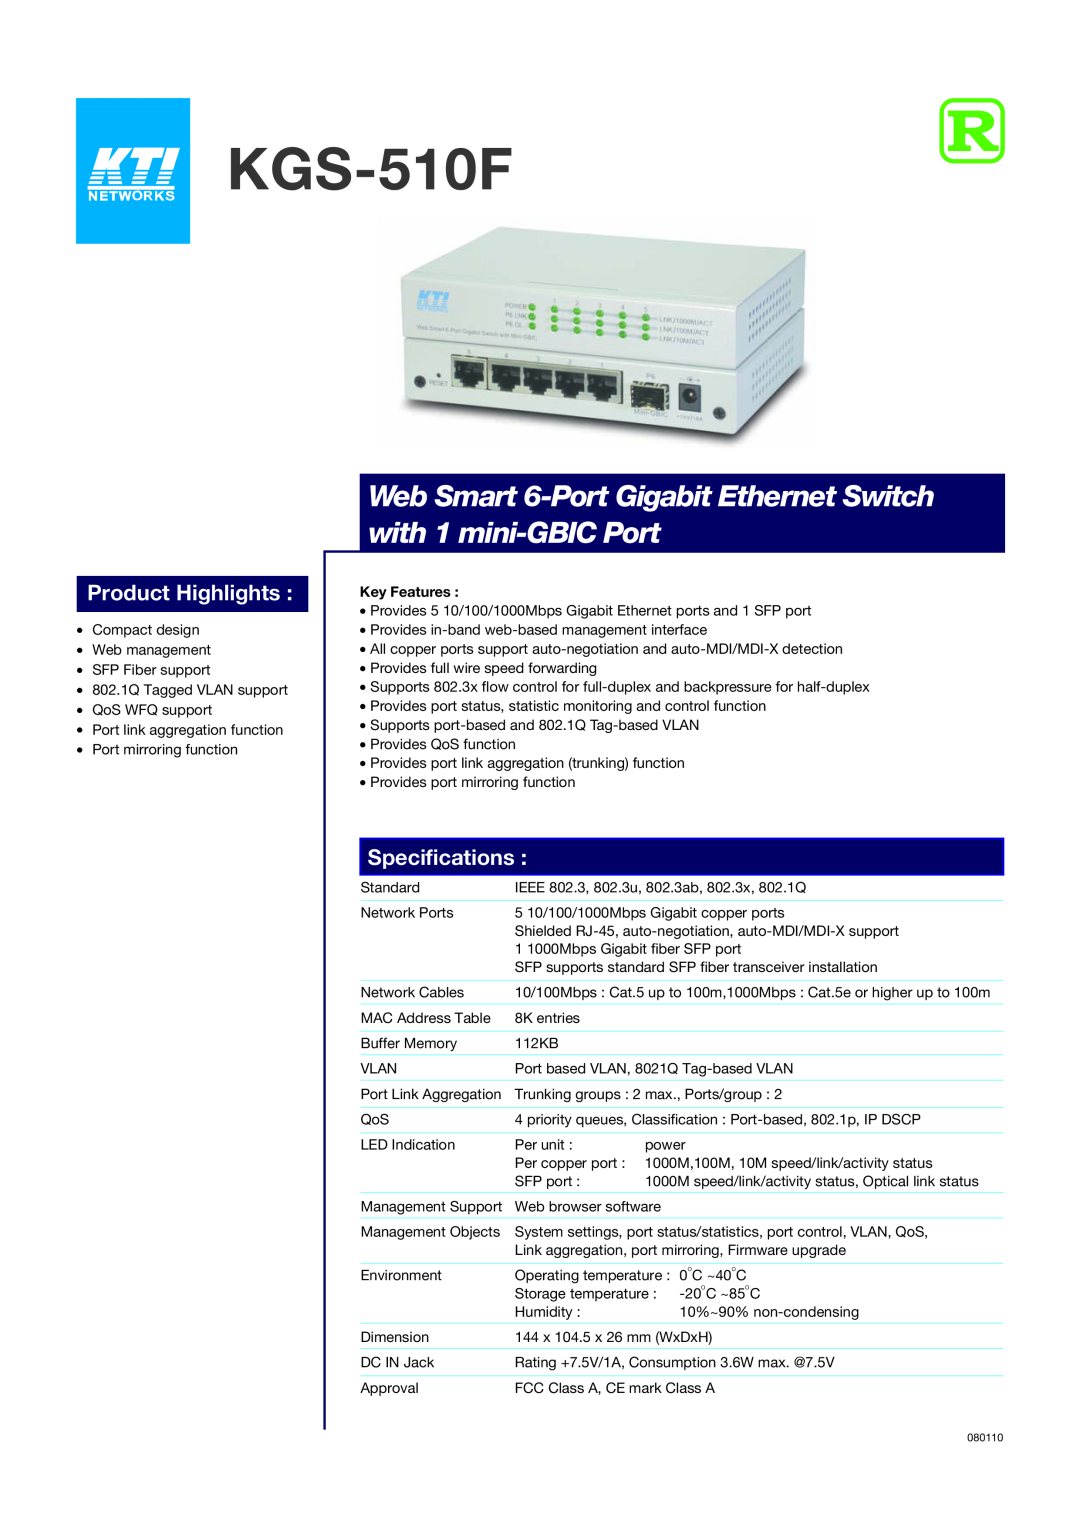 KTI Networks KGS-510F specifications Product Highlights, Specifications, Key Features 